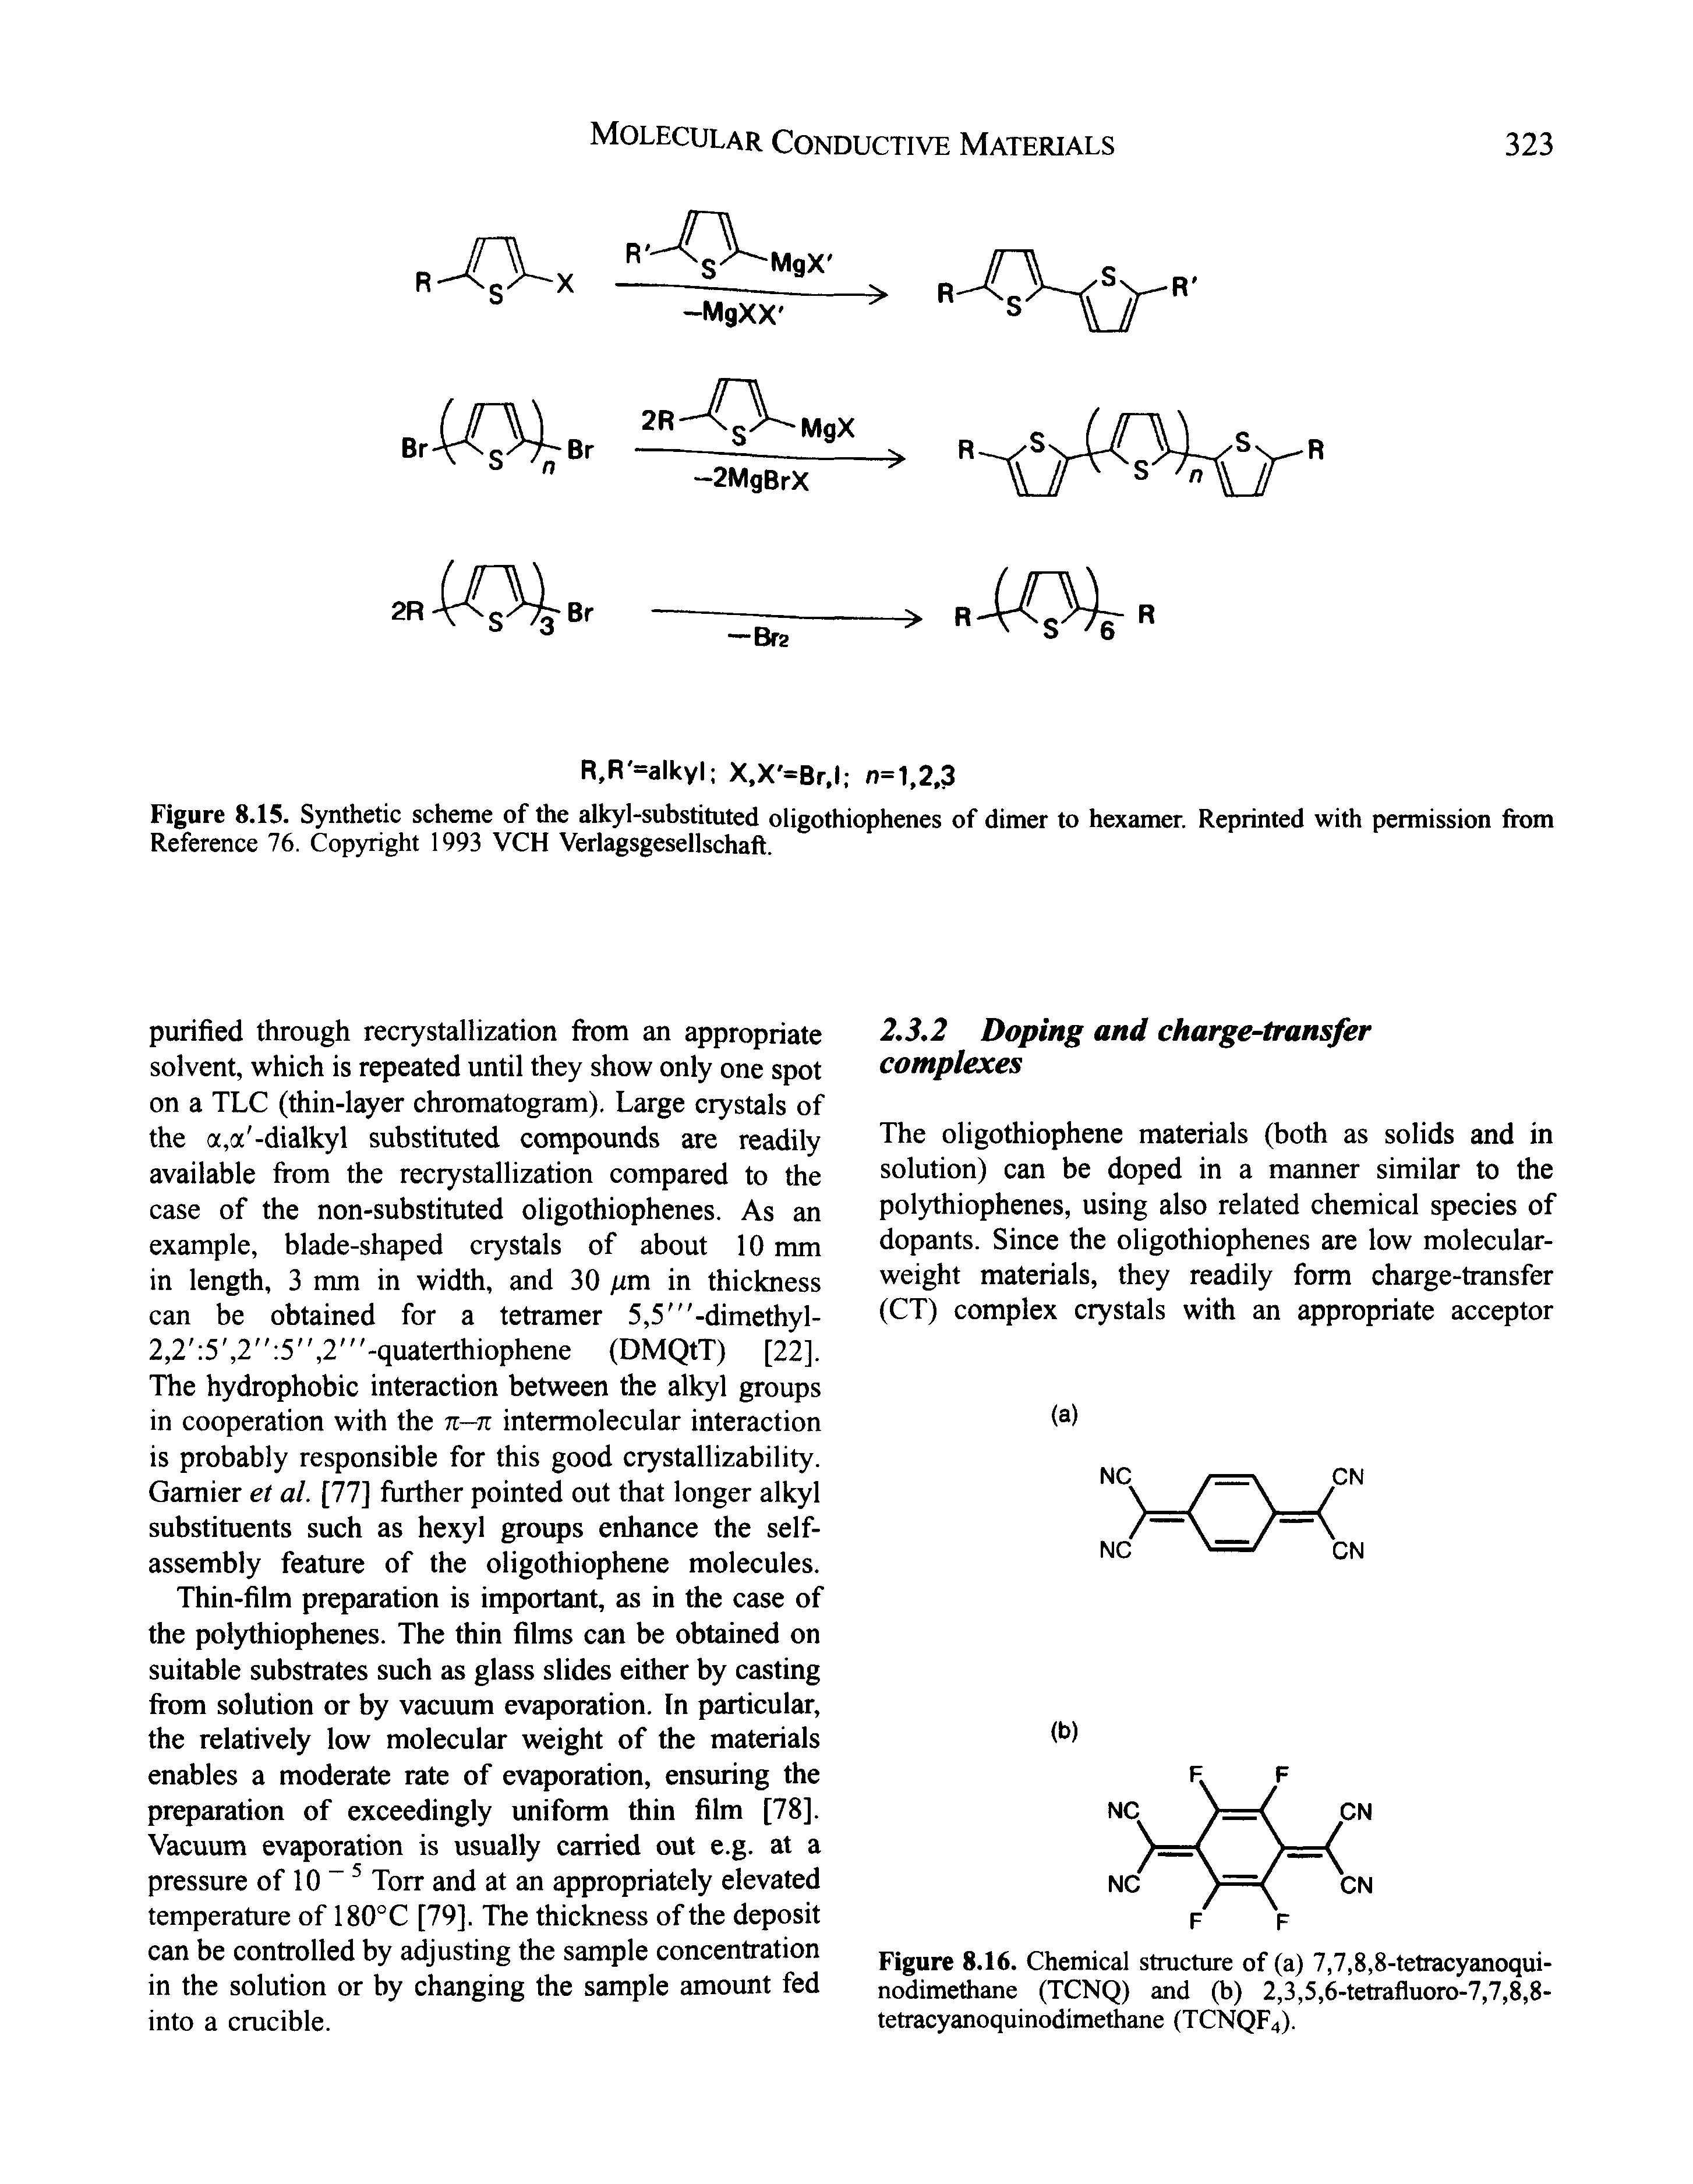 Figure 8.15. Synthetic scheme of the alkyl-substituted oligothiophenes of dimer to hexamer. Reprinted with permission from Reference 76. Copyright 1993 VCH Verlagsgesellschaft.